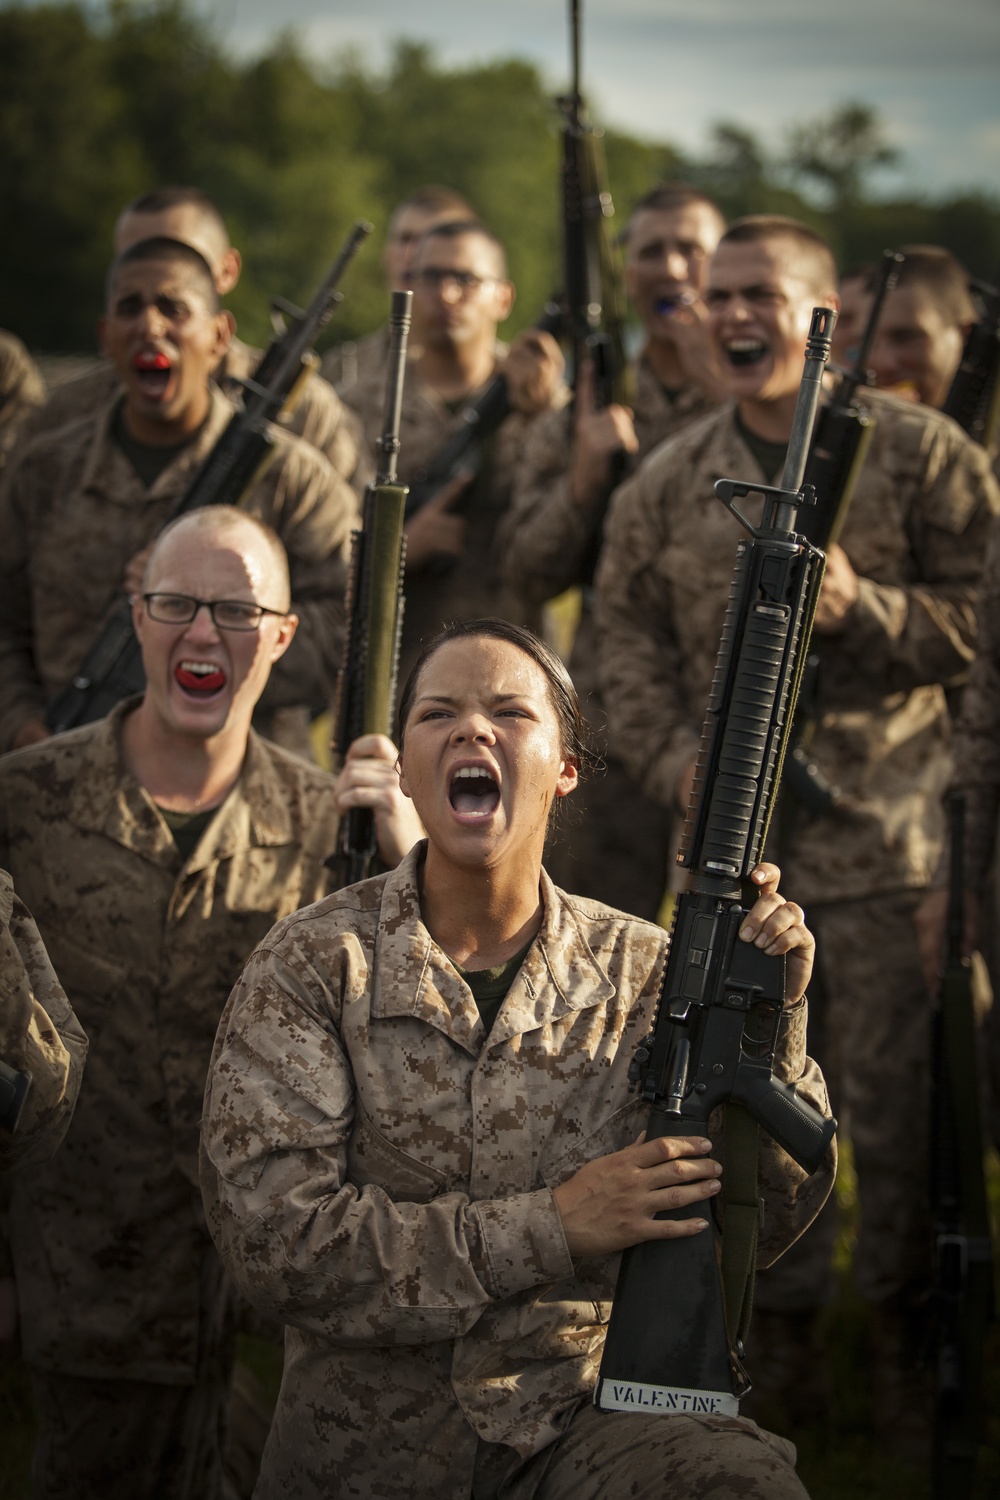 Marine Corps officer candidates train to be ethical warriors with the Marine Corps Martial Arts Program